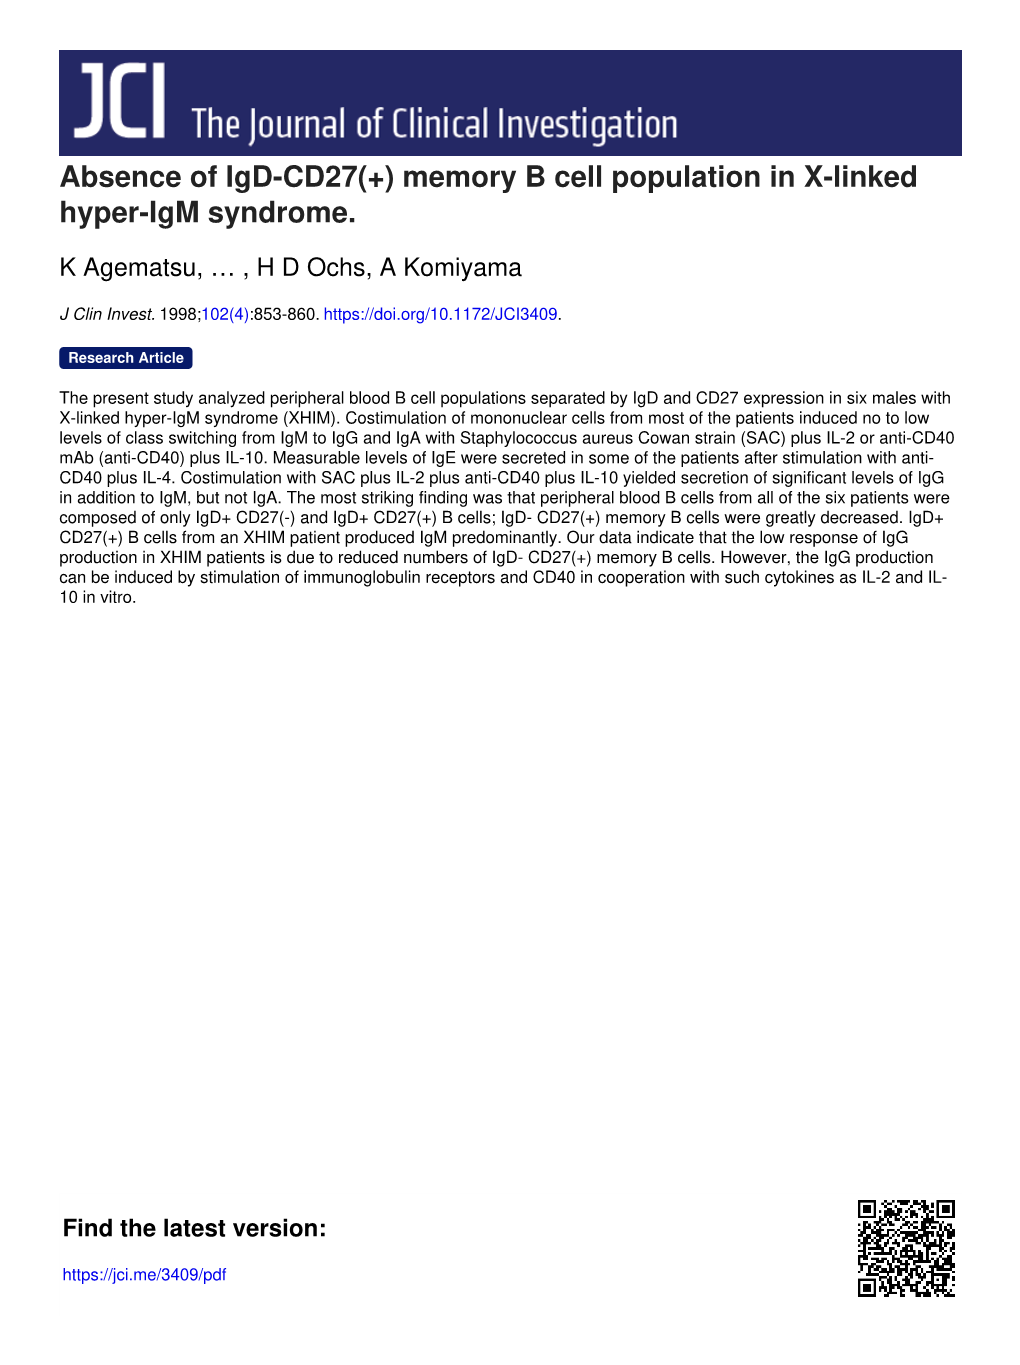 Absence of Igd-CD27(+) Memory B Cell Population in X-Linked Hyper-Igm Syndrome